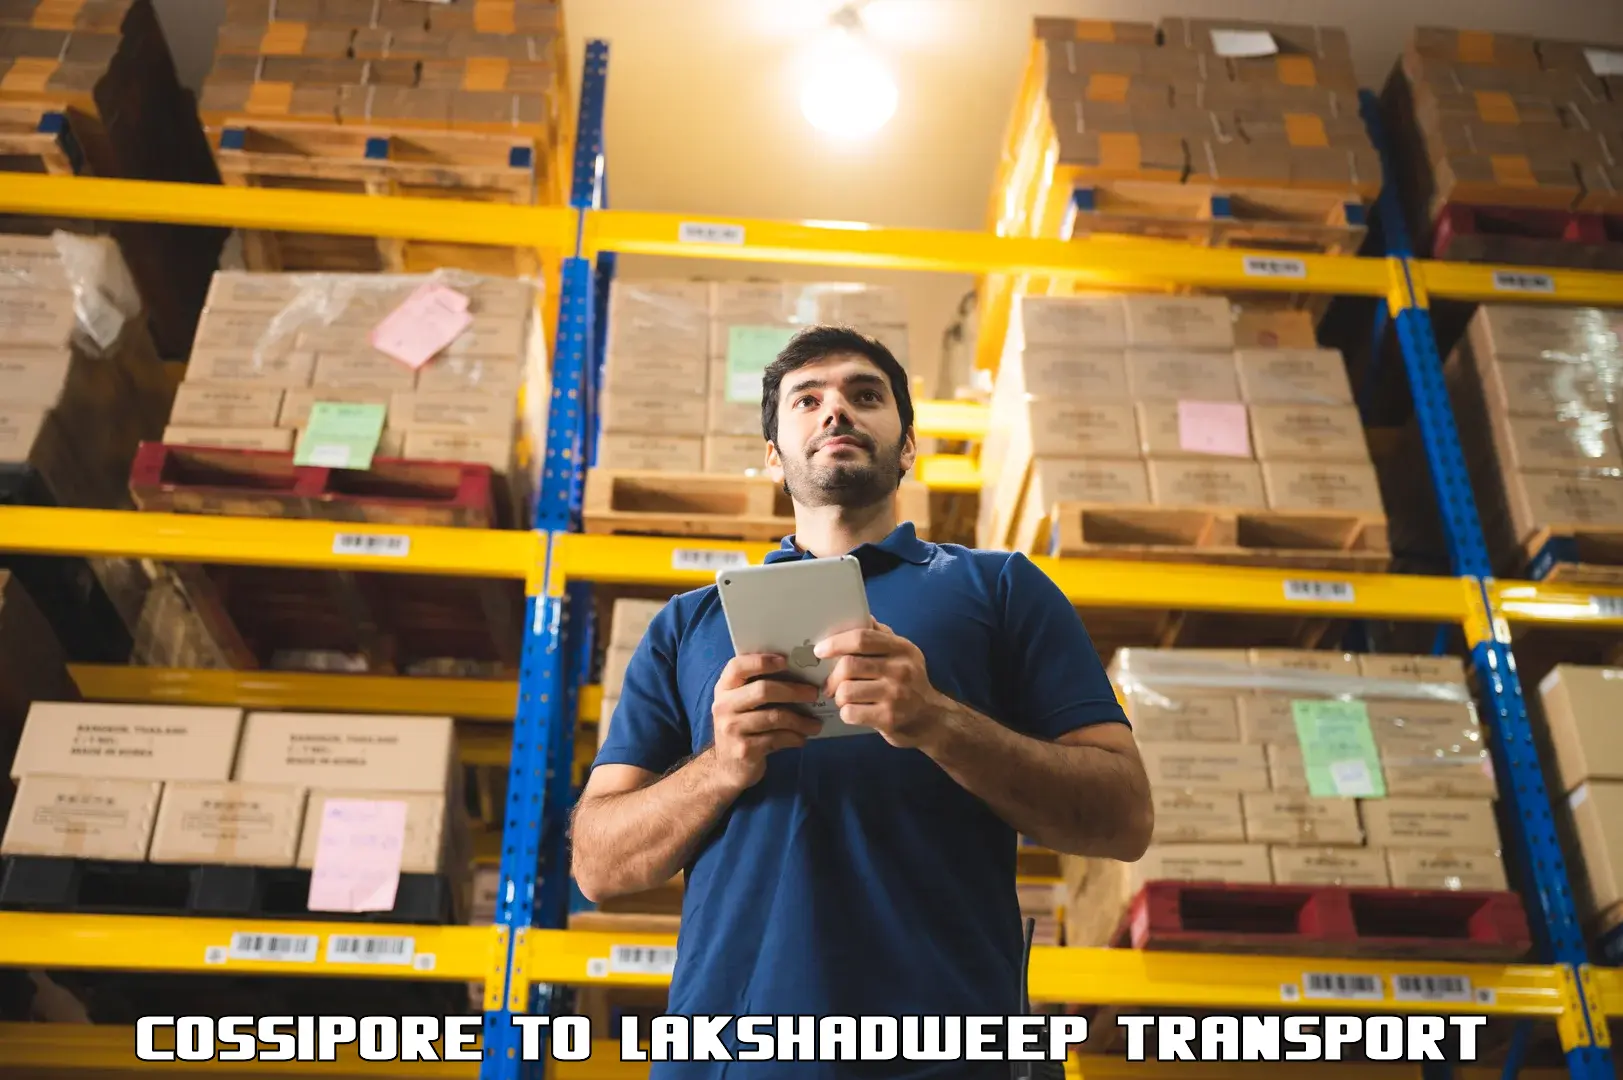 Bike shipping service Cossipore to Lakshadweep